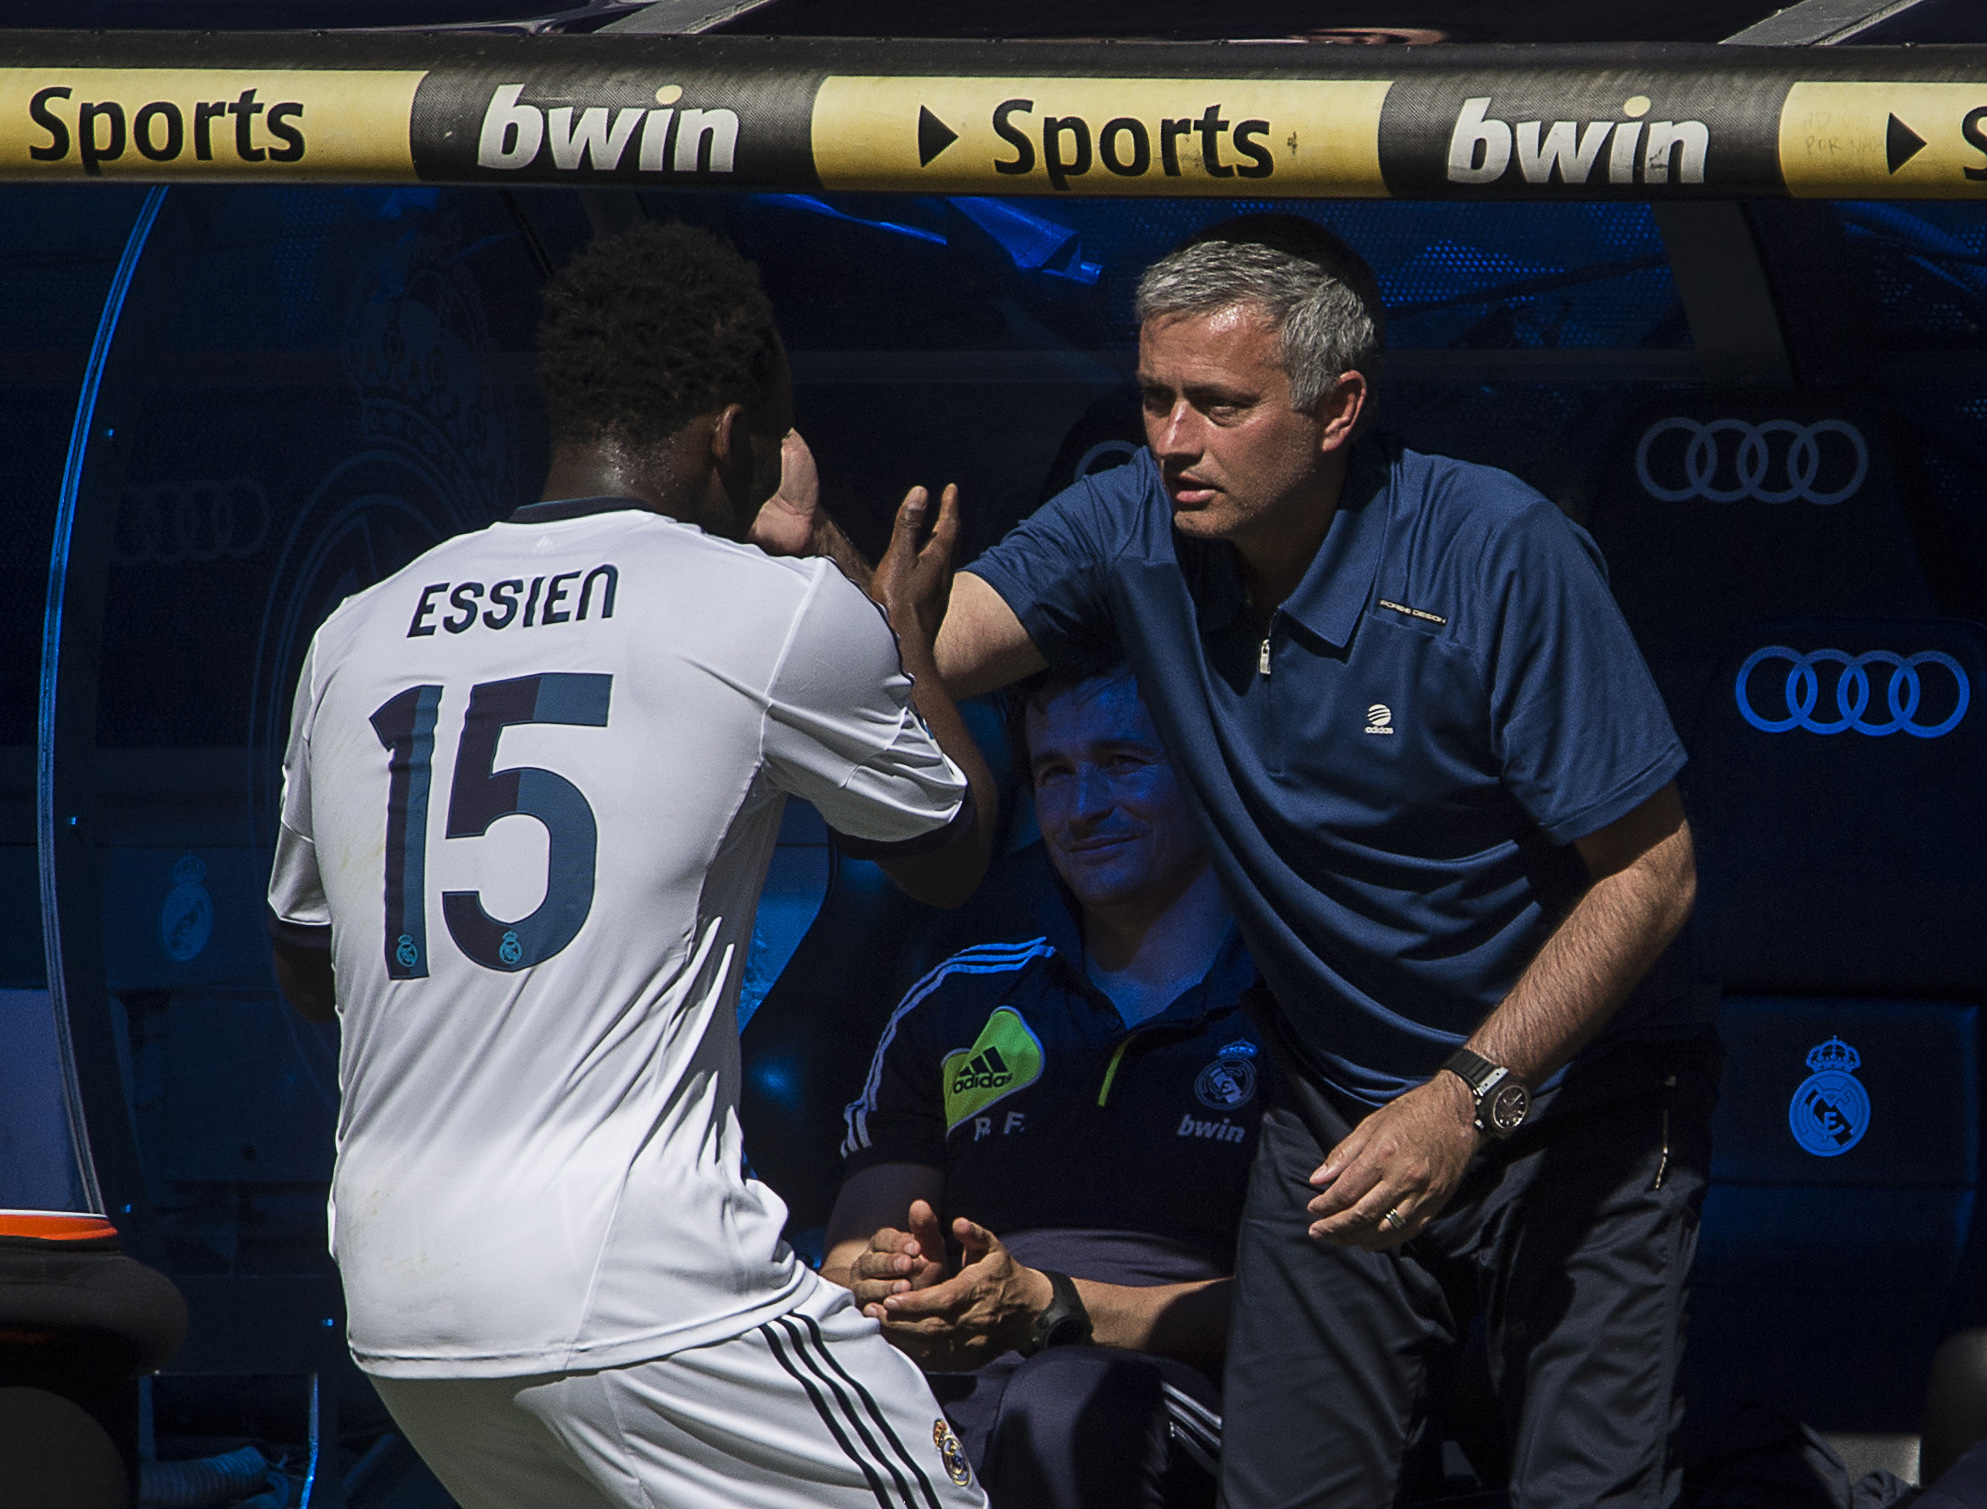 Real Madrid's Ghanaian midfielder Michael Essien (L) celebrates with Real Madrid's Portuguese coach Jose Mourinho after scoring during the Spanish League football match Real Madrid CF vs Osasuna at the Santiago Bernabeu stadium in Madrid on June 1,  2013.  AFP PHOTO/ DANI POZO        (Photo credit should read DANI POZO/AFP/Getty Images)